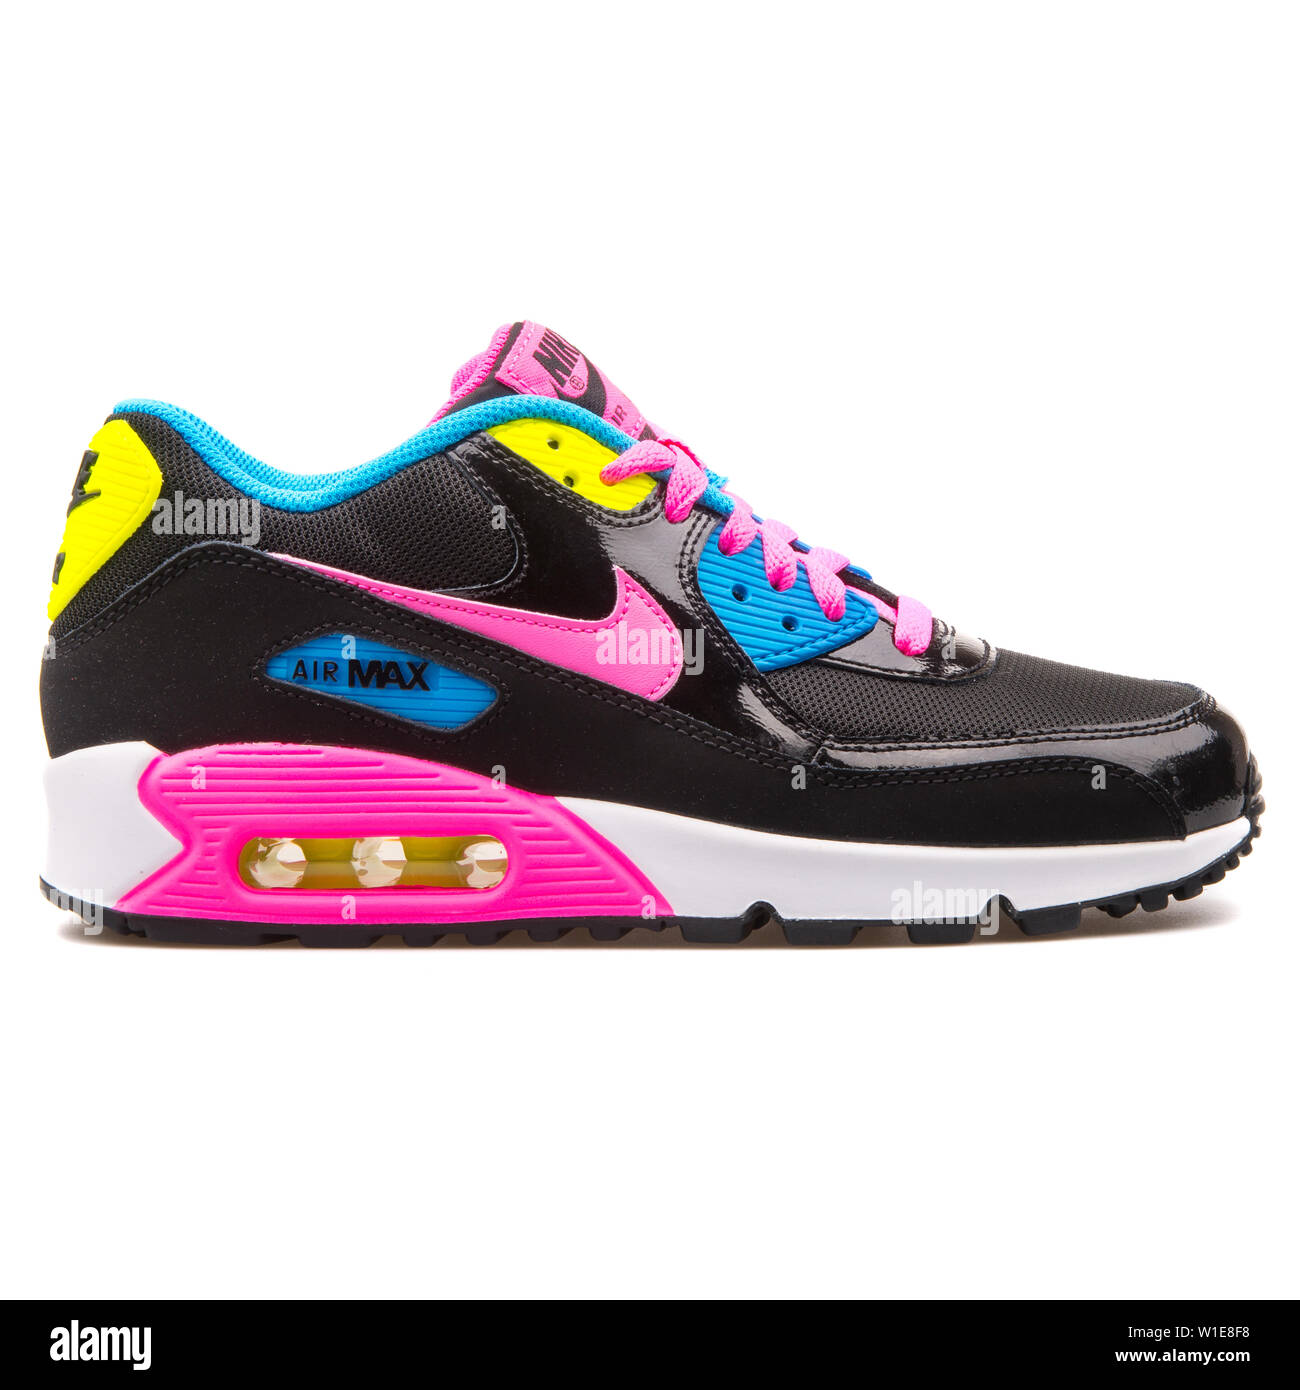 VIENNA, AUSTRIA - AUGUST 25, 2017: Nike Air Max 90 Mesh black, pink, blue  and yellow sneaker on white background Stock Photo - Alamy